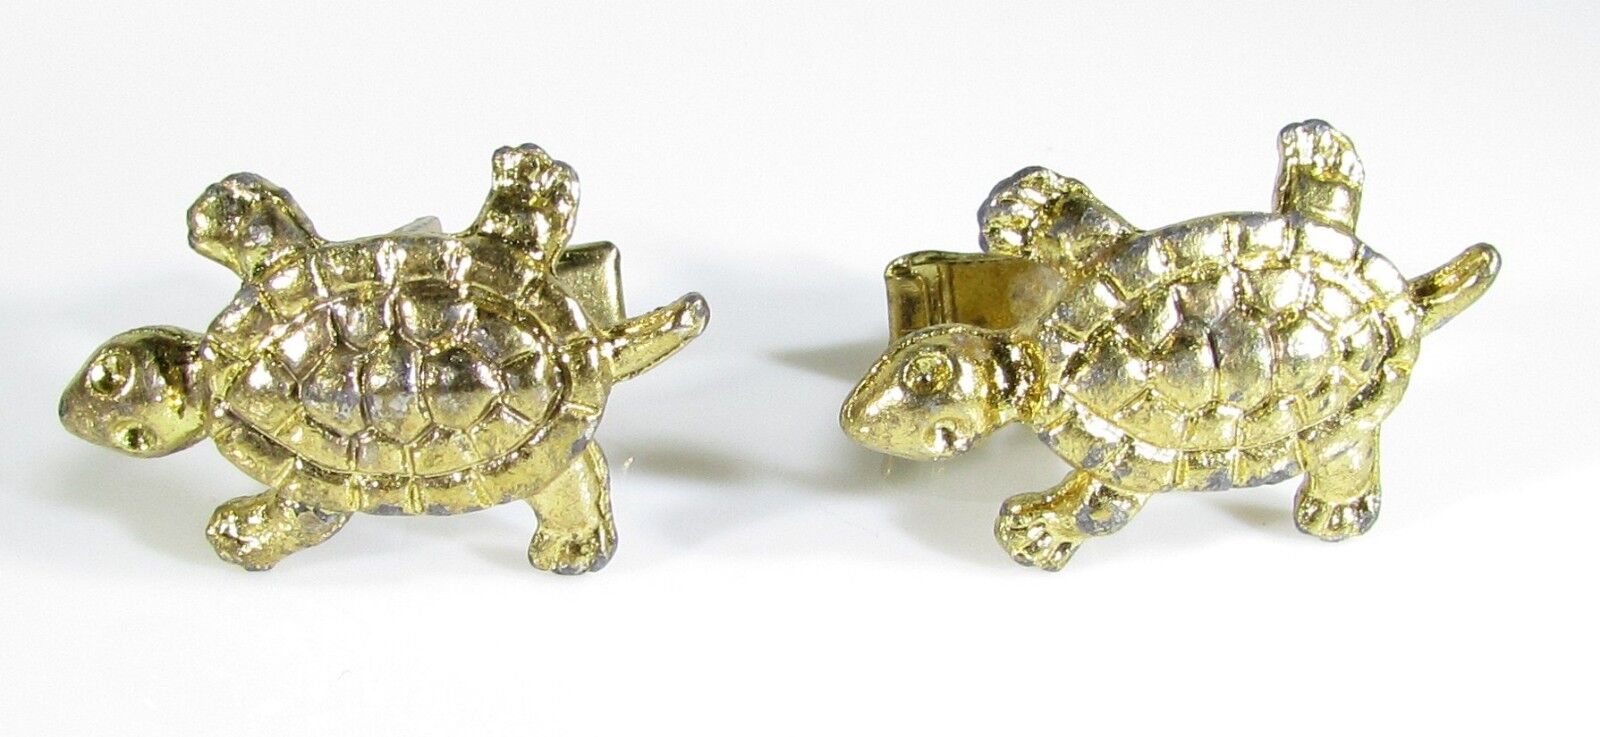 Gold Tone Cufflinks with a Turtle